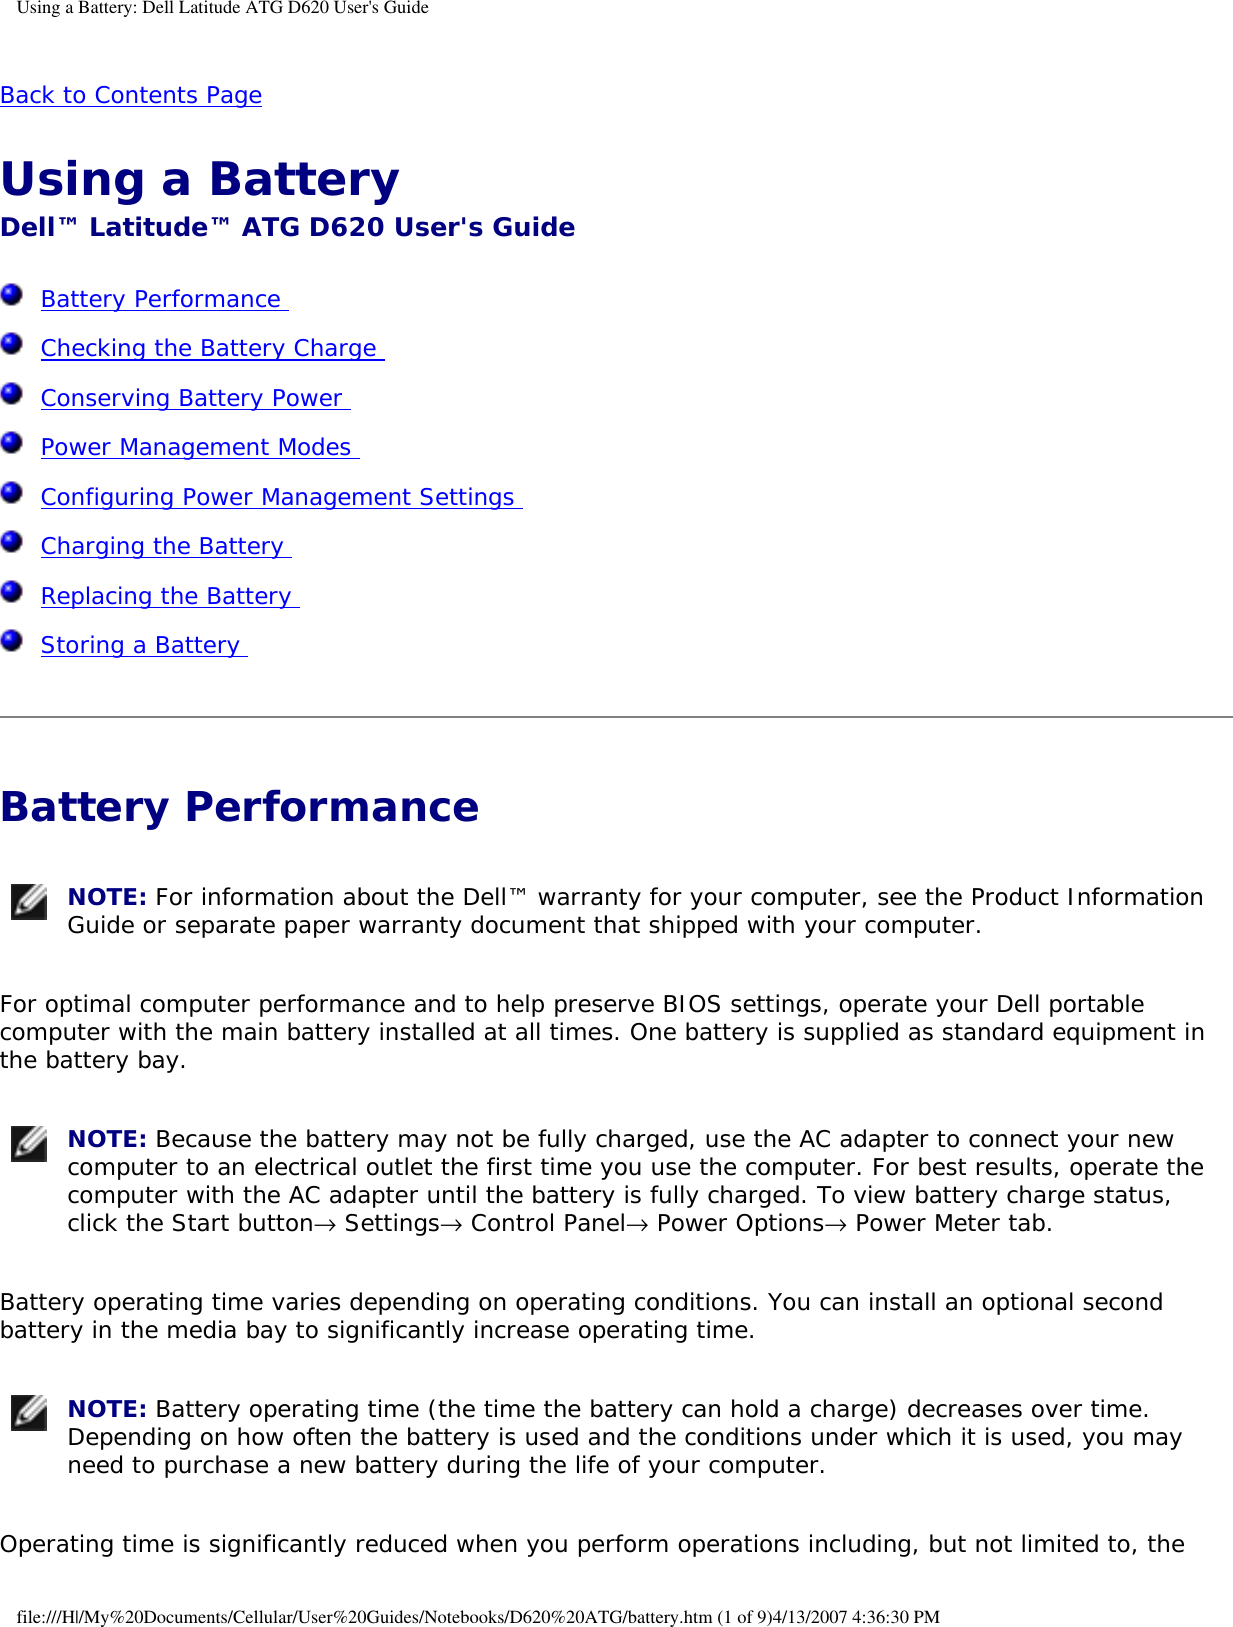 Using a Battery: Dell Latitude ATG D620 User&apos;s GuideBack to Contents Page Using a Battery Dell™ Latitude™ ATG D620 User&apos;s Guide  Battery Performance   Checking the Battery Charge   Conserving Battery Power   Power Management Modes   Configuring Power Management Settings   Charging the Battery   Replacing the Battery   Storing a Battery  Battery Performance  NOTE: For information about the Dell™ warranty for your computer, see the Product Information Guide or separate paper warranty document that shipped with your computer. For optimal computer performance and to help preserve BIOS settings, operate your Dell portable computer with the main battery installed at all times. One battery is supplied as standard equipment in the battery bay. NOTE: Because the battery may not be fully charged, use the AC adapter to connect your new computer to an electrical outlet the first time you use the computer. For best results, operate the computer with the AC adapter until the battery is fully charged. To view battery charge status, click the Start button→ Settings→ Control Panel→ Power Options→ Power Meter tab. Battery operating time varies depending on operating conditions. You can install an optional second battery in the media bay to significantly increase operating time. NOTE: Battery operating time (the time the battery can hold a charge) decreases over time. Depending on how often the battery is used and the conditions under which it is used, you may need to purchase a new battery during the life of your computer. Operating time is significantly reduced when you perform operations including, but not limited to, the file:///H|/My%20Documents/Cellular/User%20Guides/Notebooks/D620%20ATG/battery.htm (1 of 9)4/13/2007 4:36:30 PM